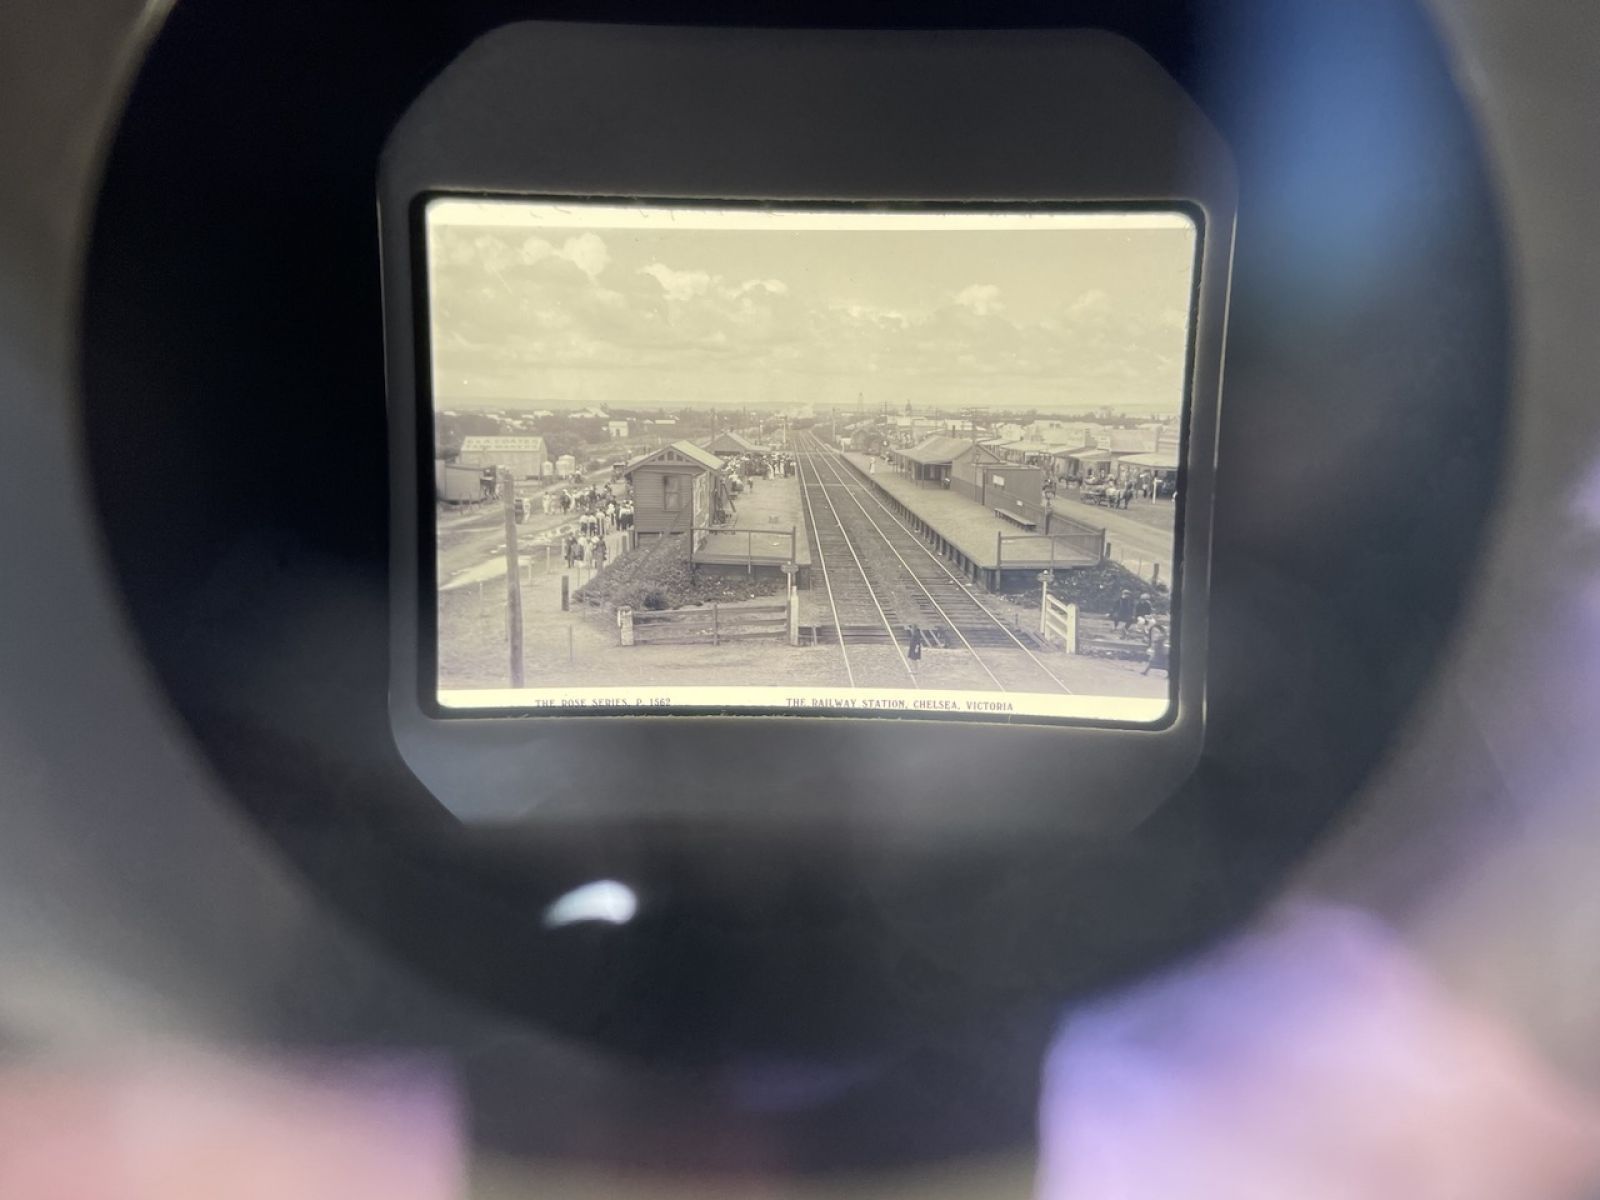 A black and white image of the old Chelsea Station in the 1920's as viewed through the Station Street stereoscopic box